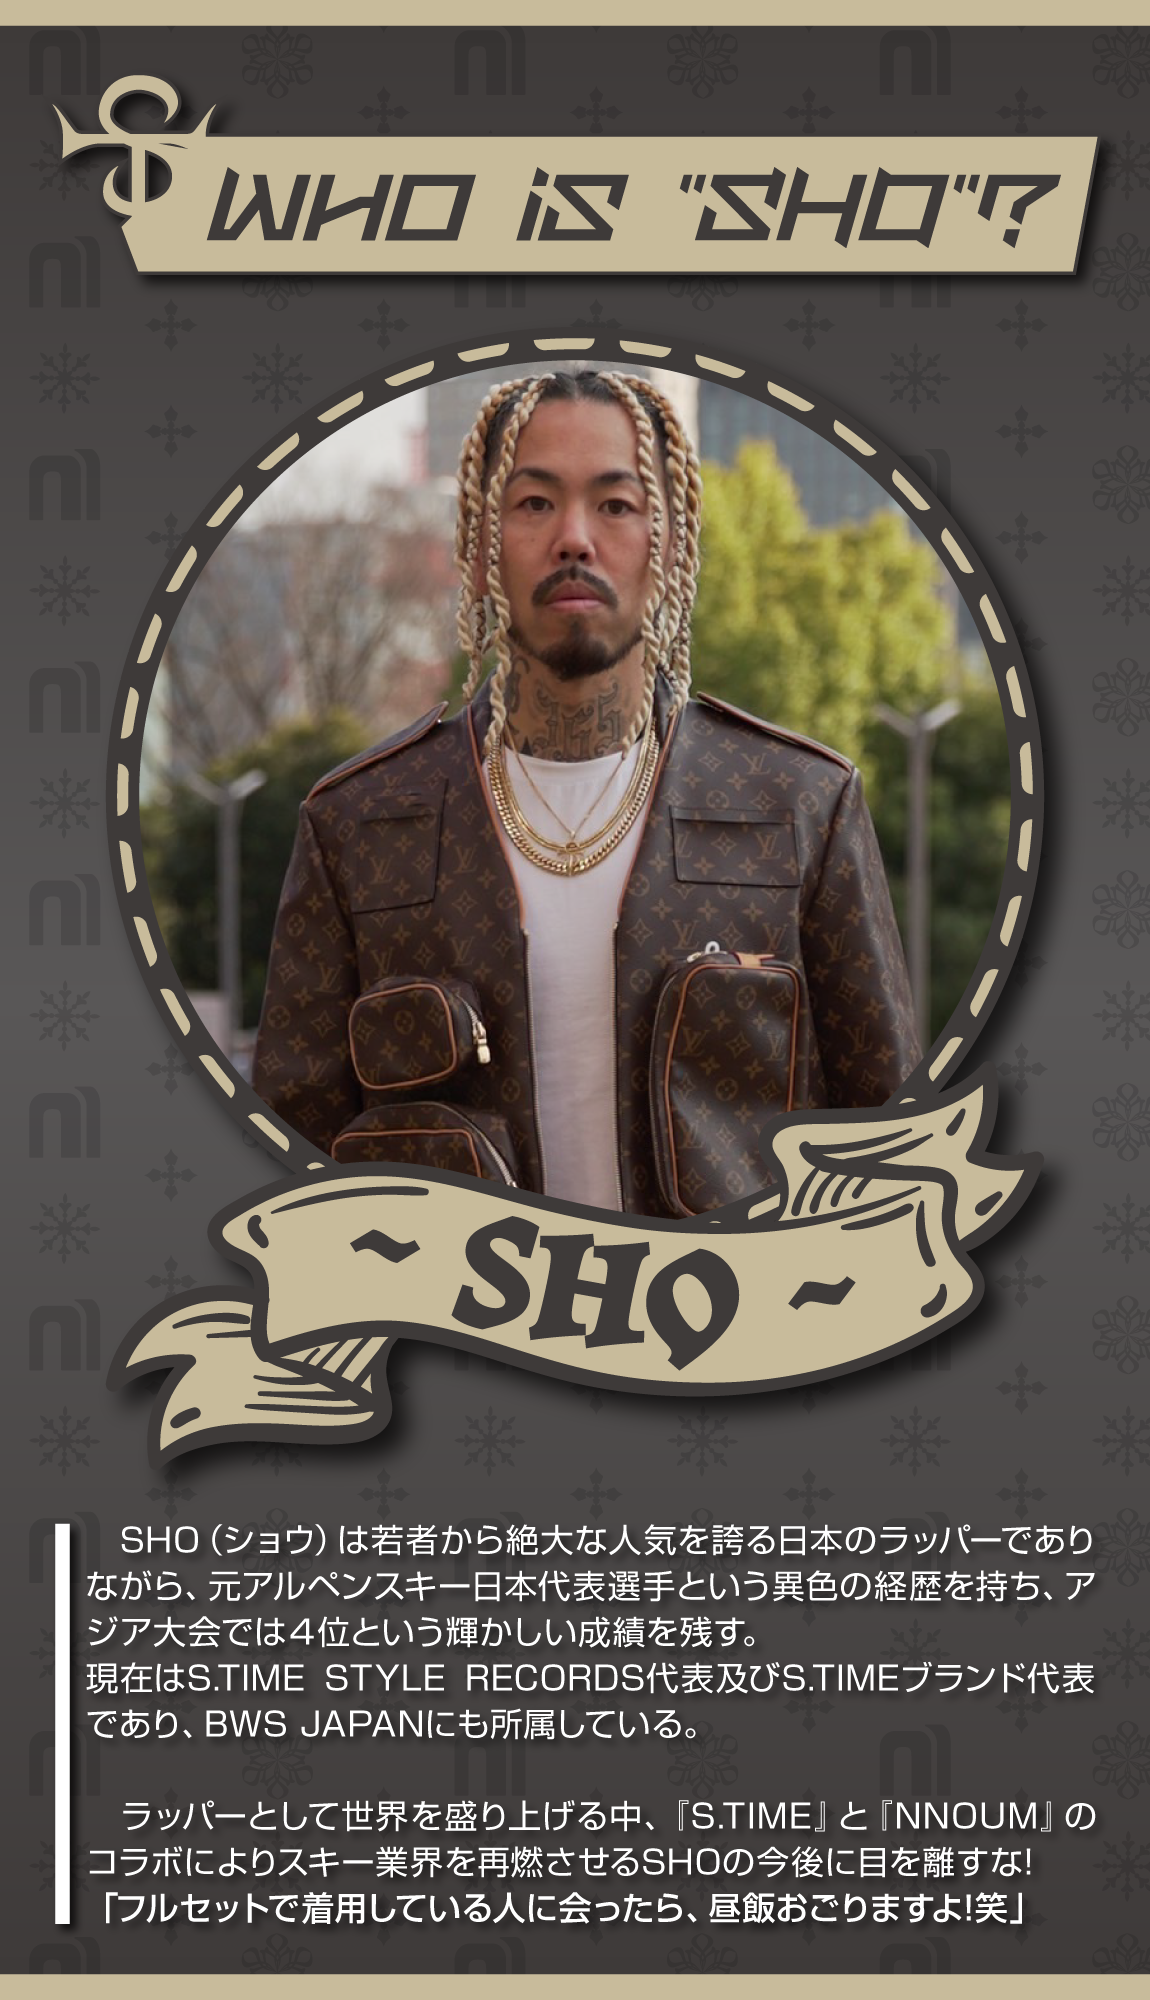 Who is Sho?